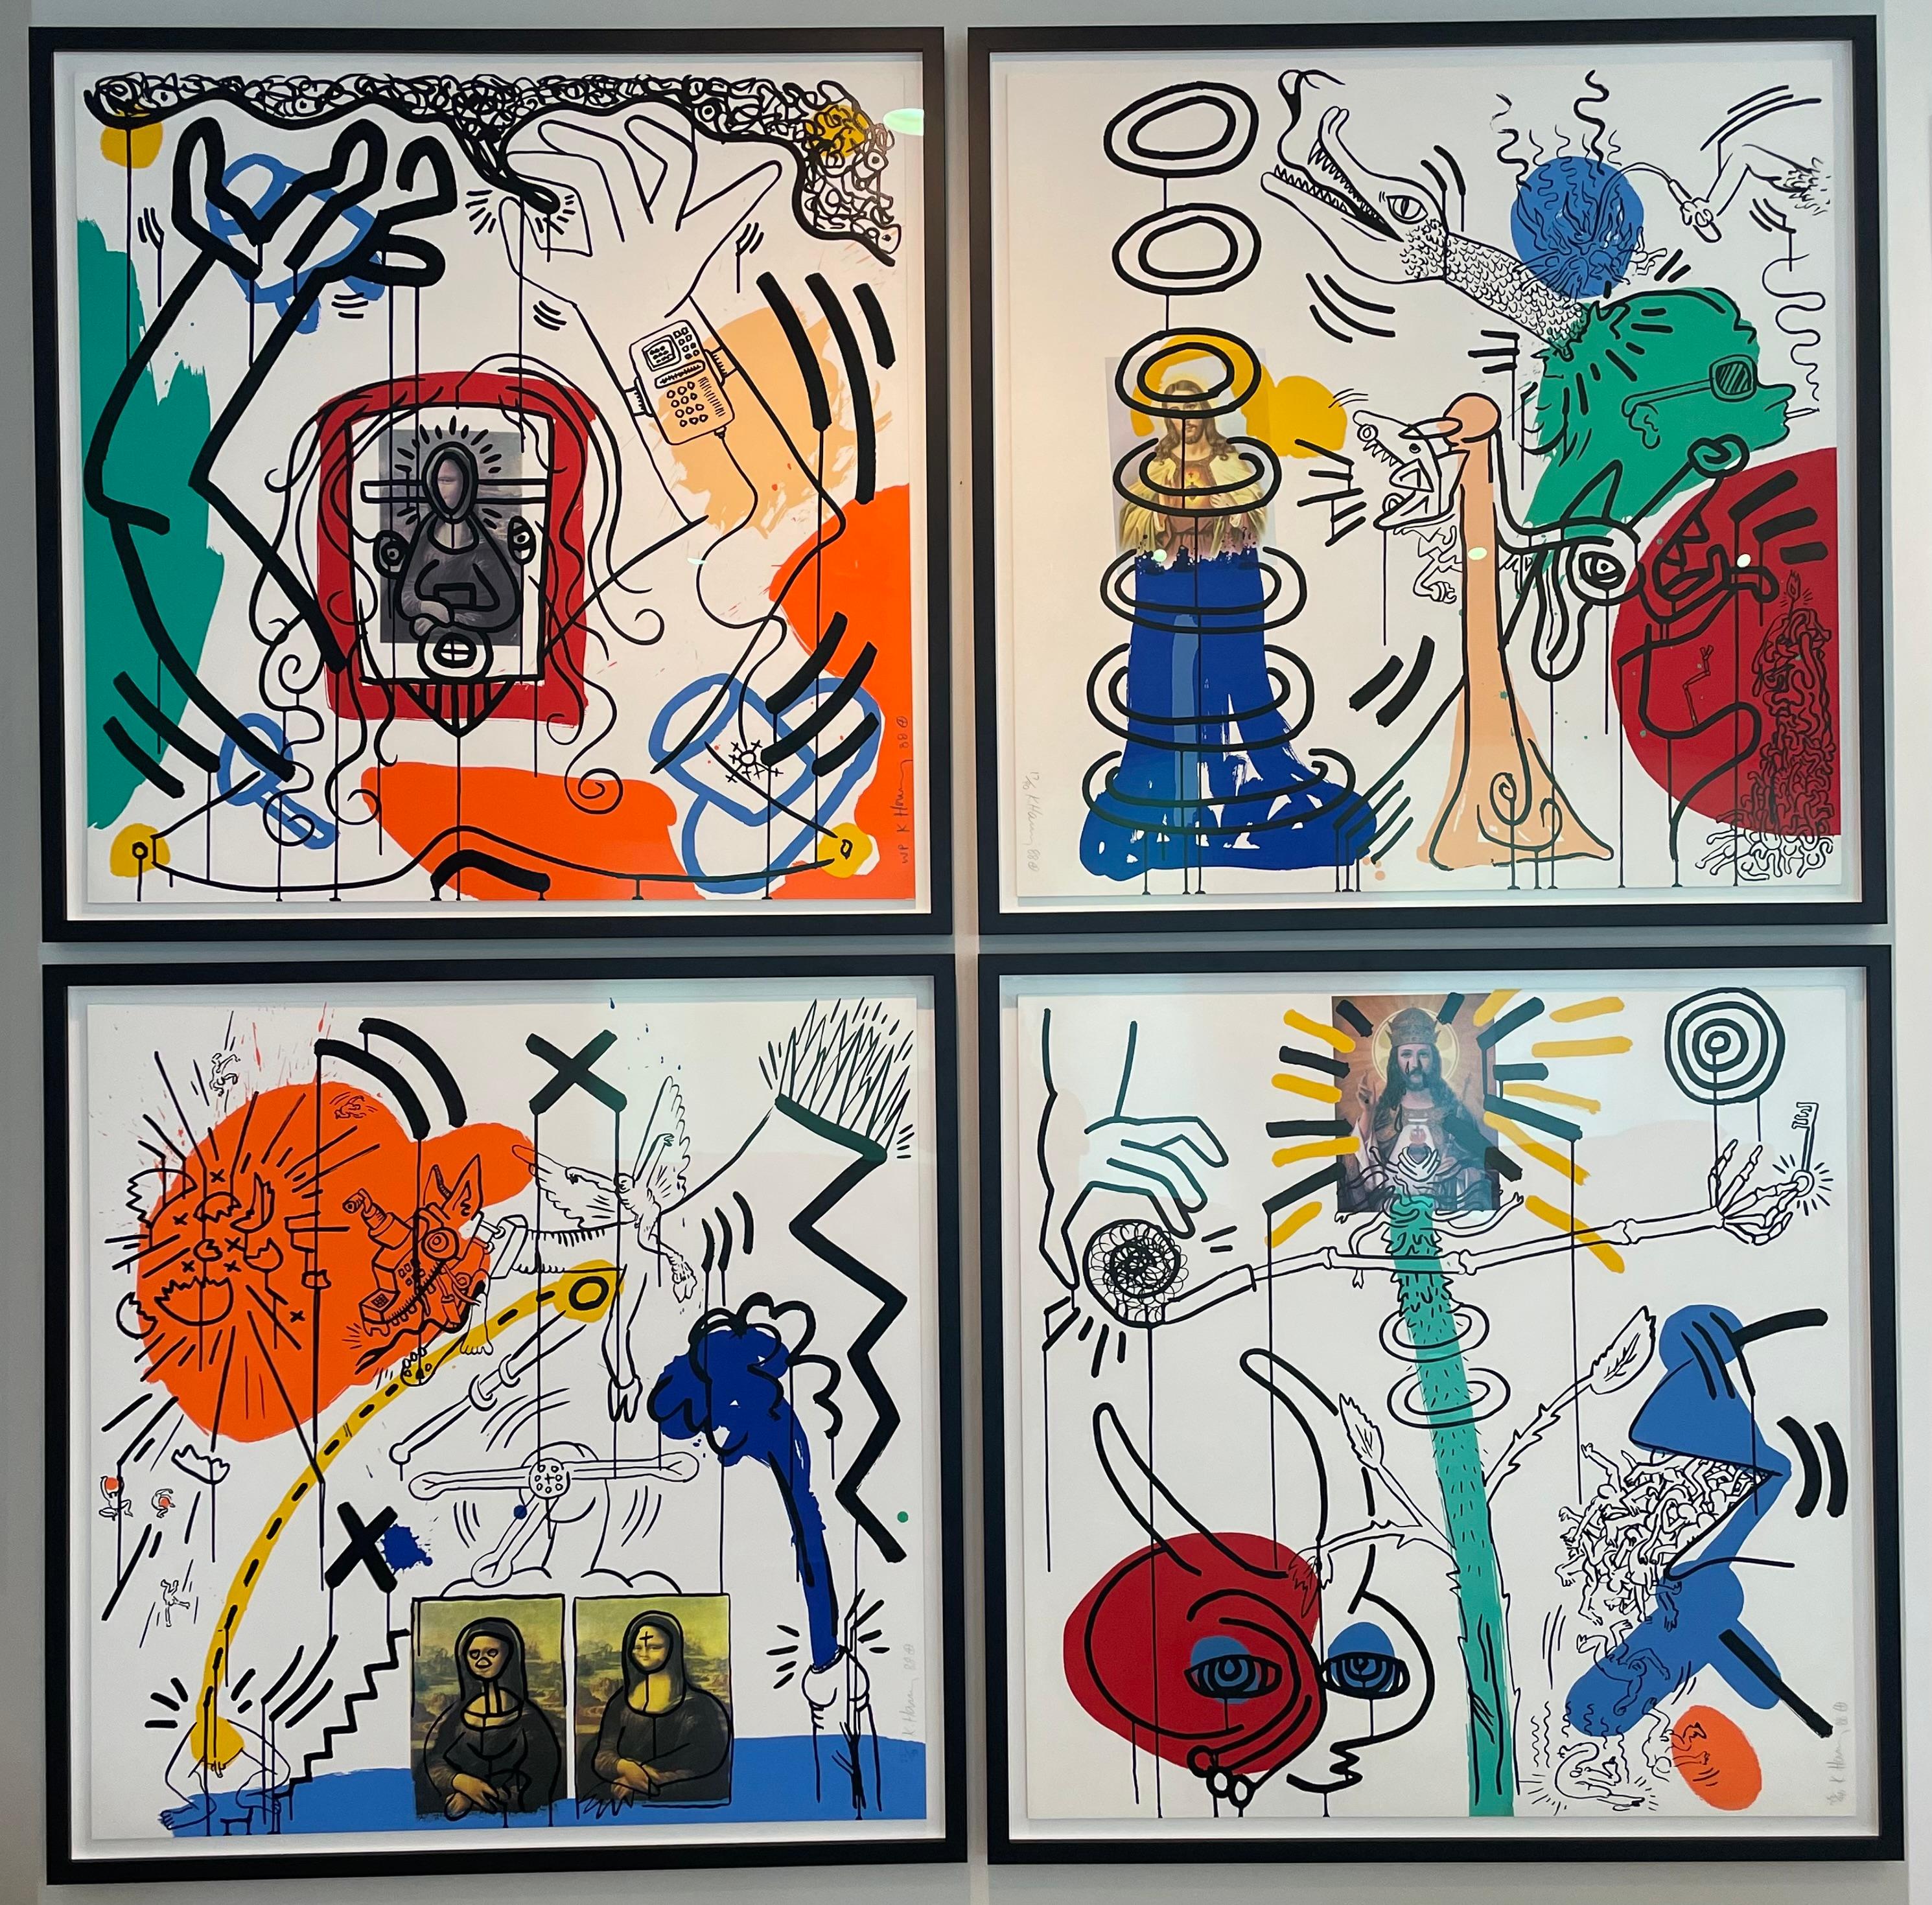 Buy now with ShopPay
Buy with 
More payment options
Artist: Keith Haring 
Title: Apocalypse 6
Size:  38 × 38 in  96.5 × 96.5 cm
Medium: Screenprint in colors on Lenox Museum Board
Edition: WP (Working Proof) of 90
Year: 1988
Notes: Hand-signed by